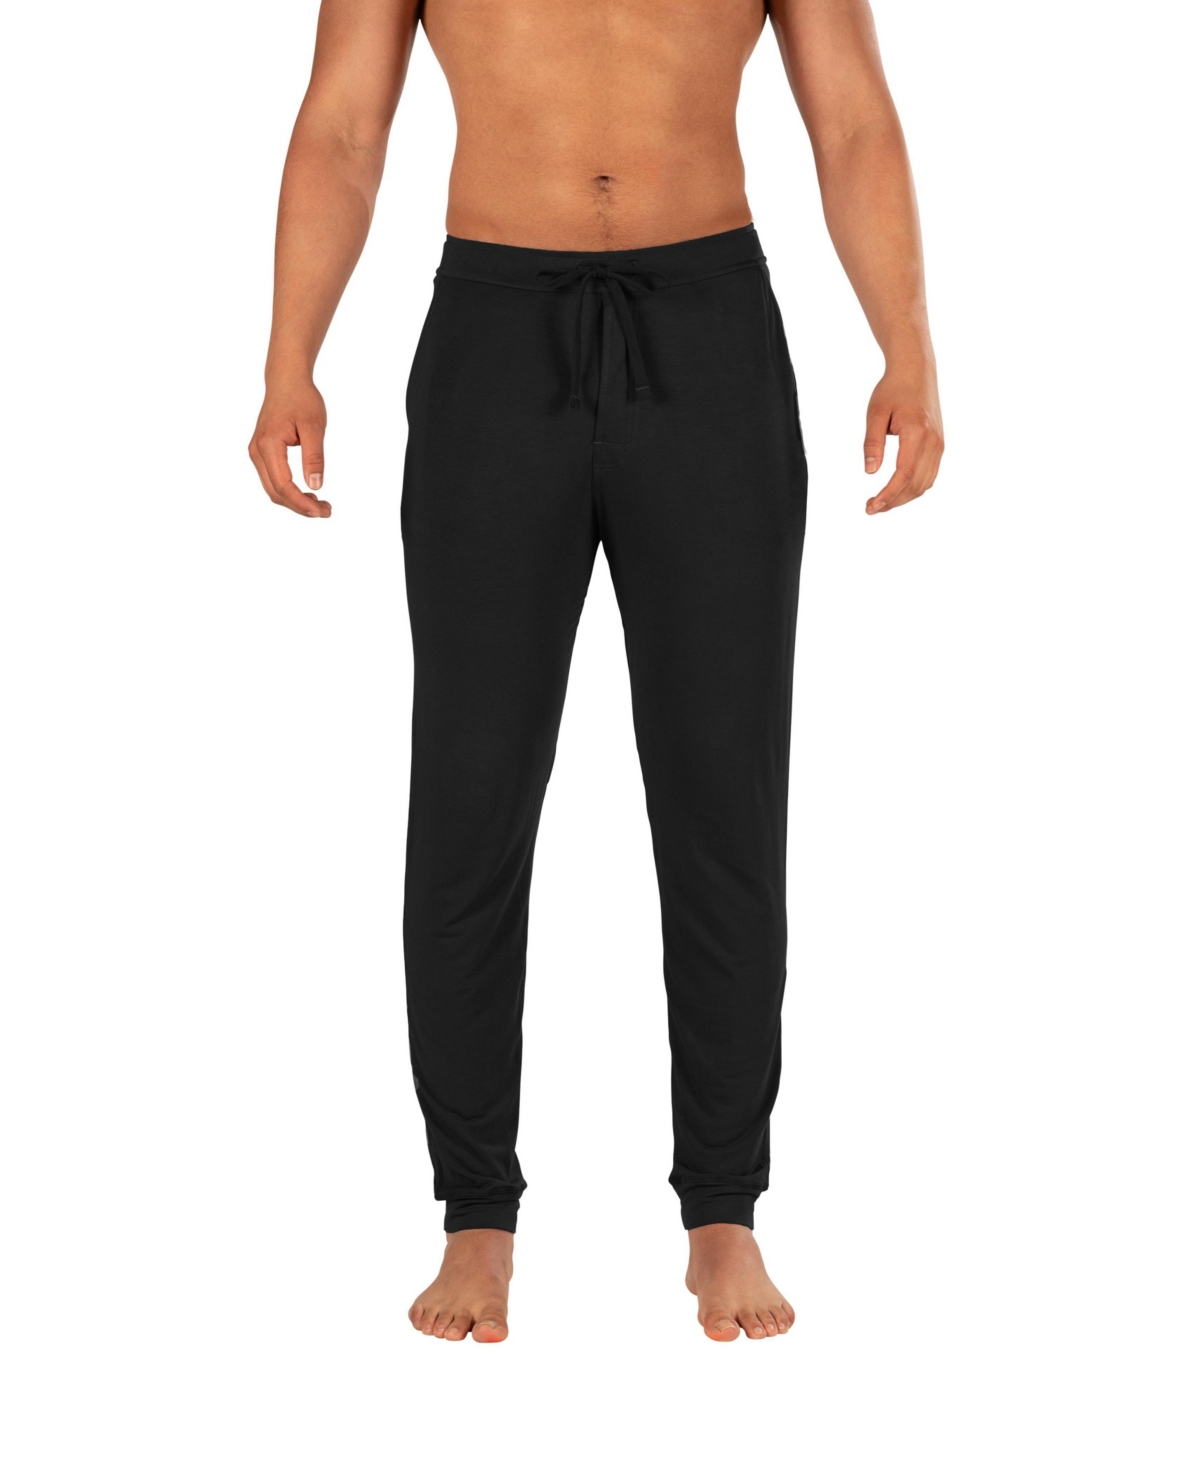 Saxx Men's Snooze Relaxed Fit Sleep Pants In Black